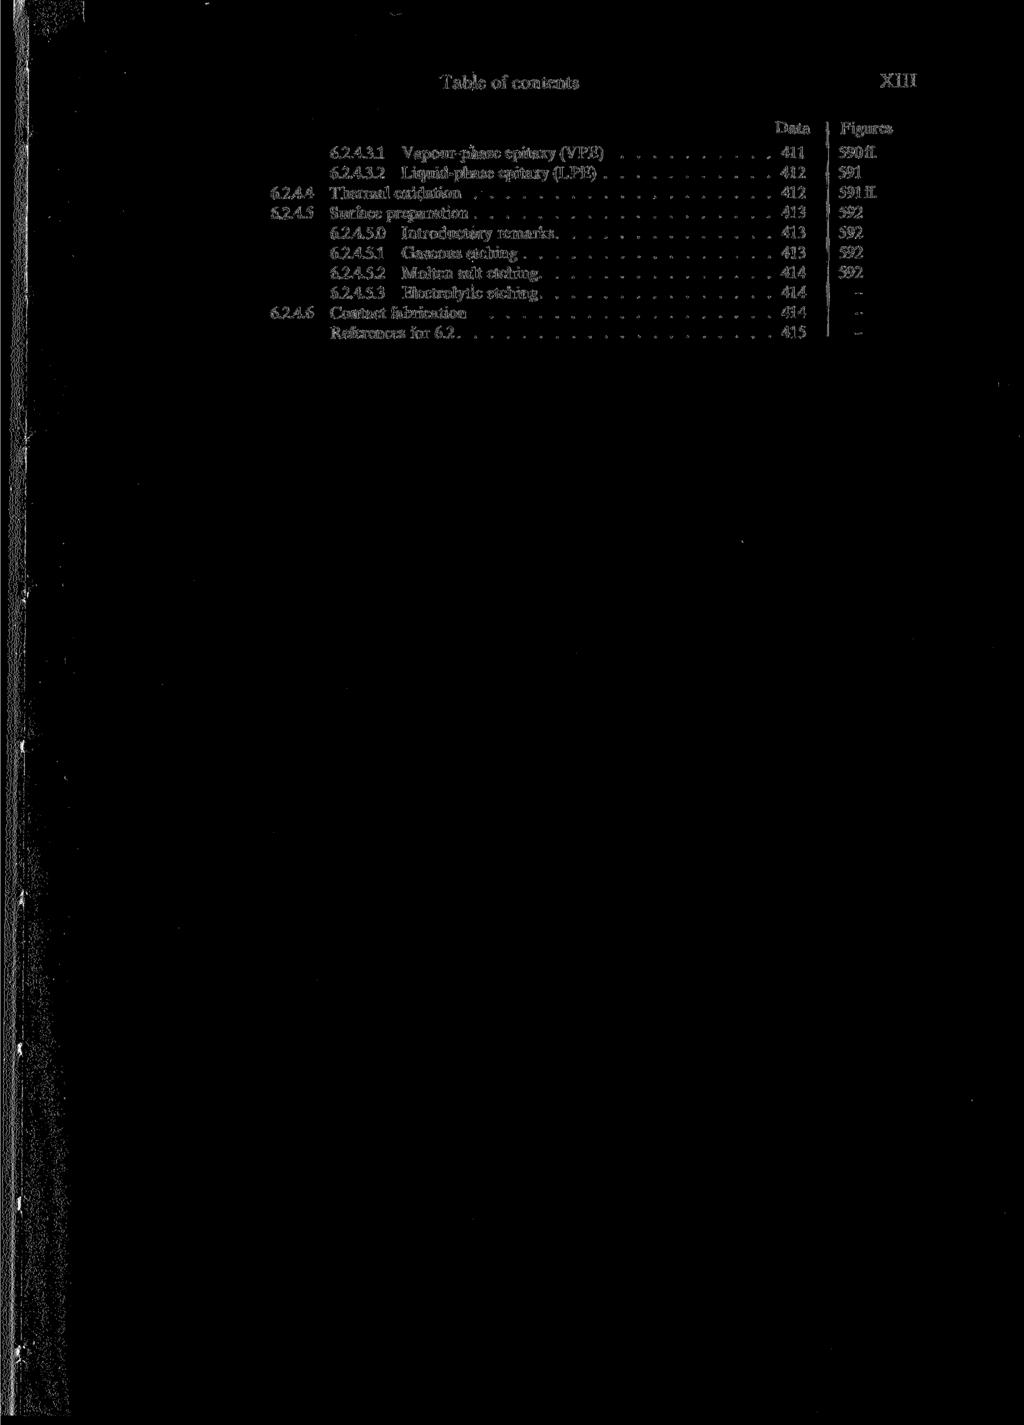 6.2.4.4 6.2.4.5 6.2.4.6 Table of contents 6.2.4.3.1 Vapour-phase epitaxy (VPE) 411 6.2.4.3.2 Liquid-phase epitaxy (LPE) 412 Thermal oxidation 412 Surface preparation 413 6.2.4.5.0 Introductory remarks 413 6.